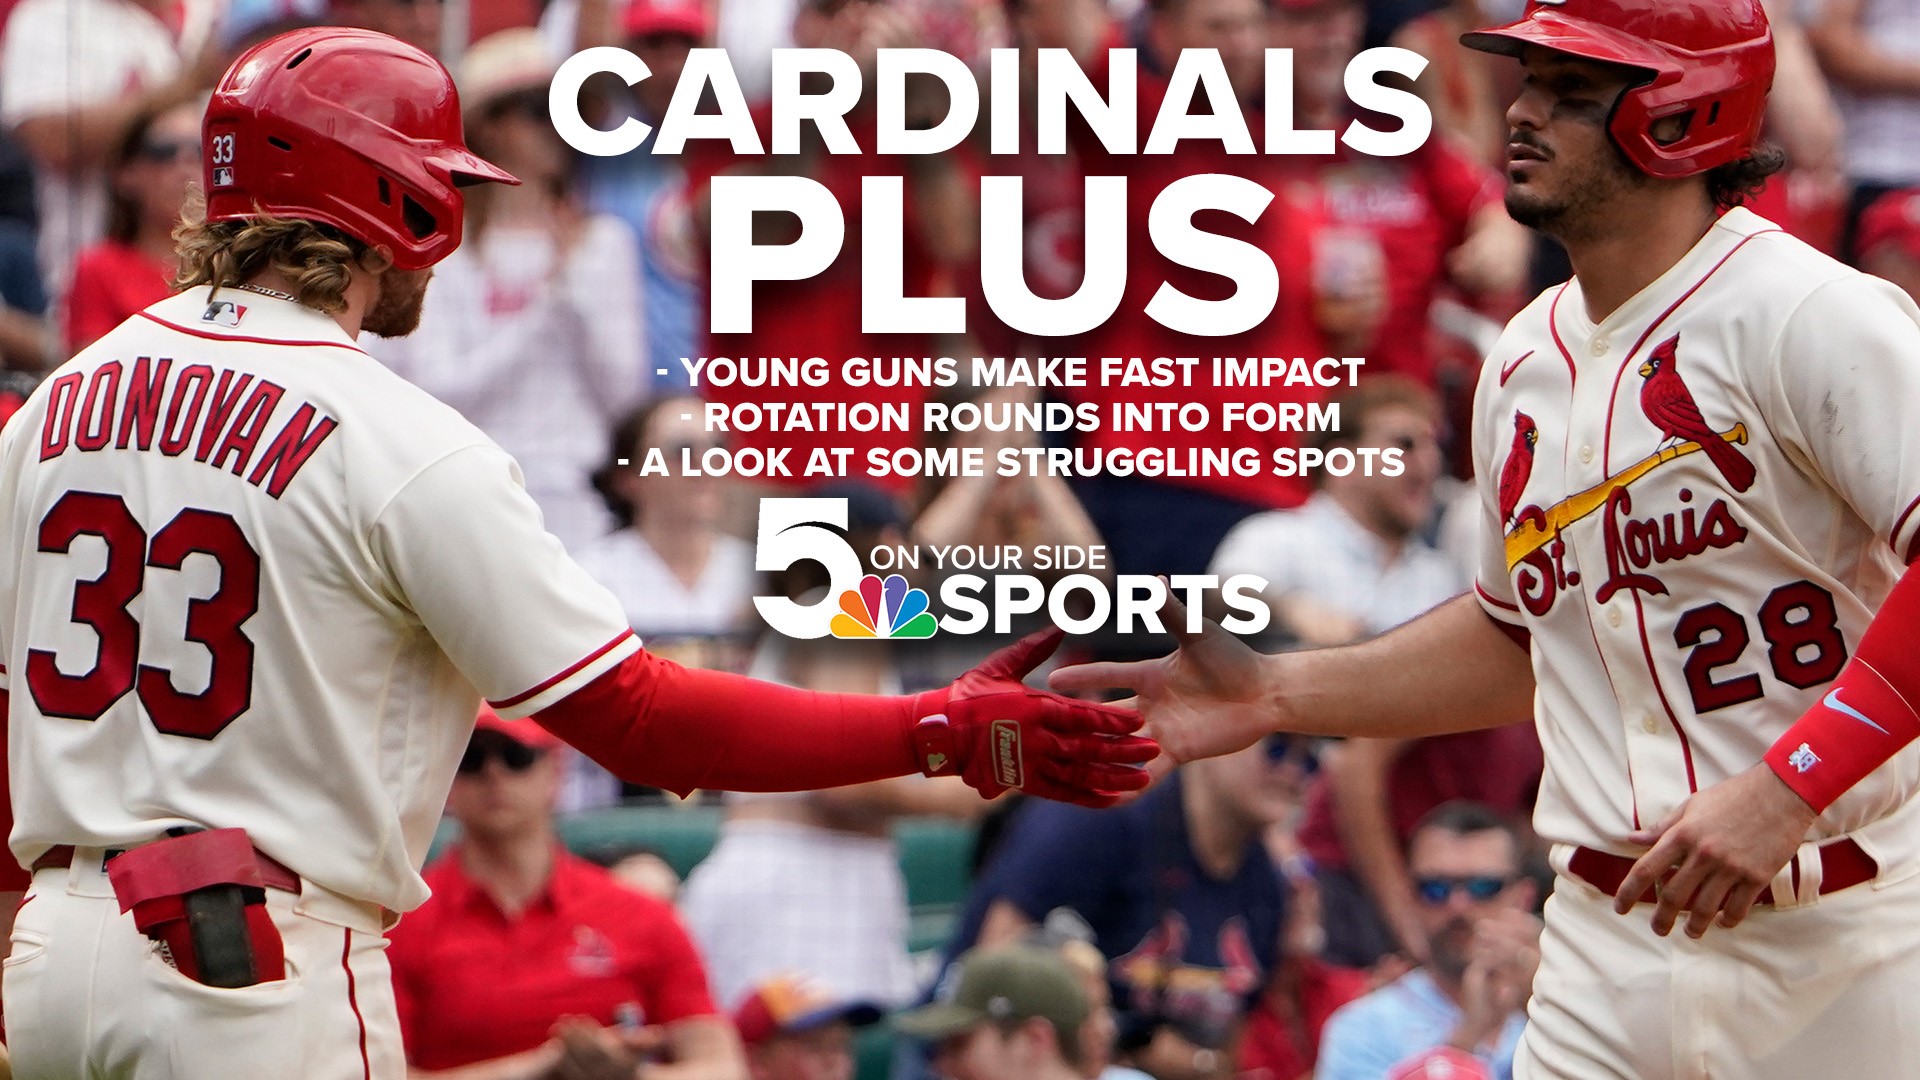 The Cardinals leaped up to the top of the National League Central thanks to some young additions. Now the question is, can they stay there?